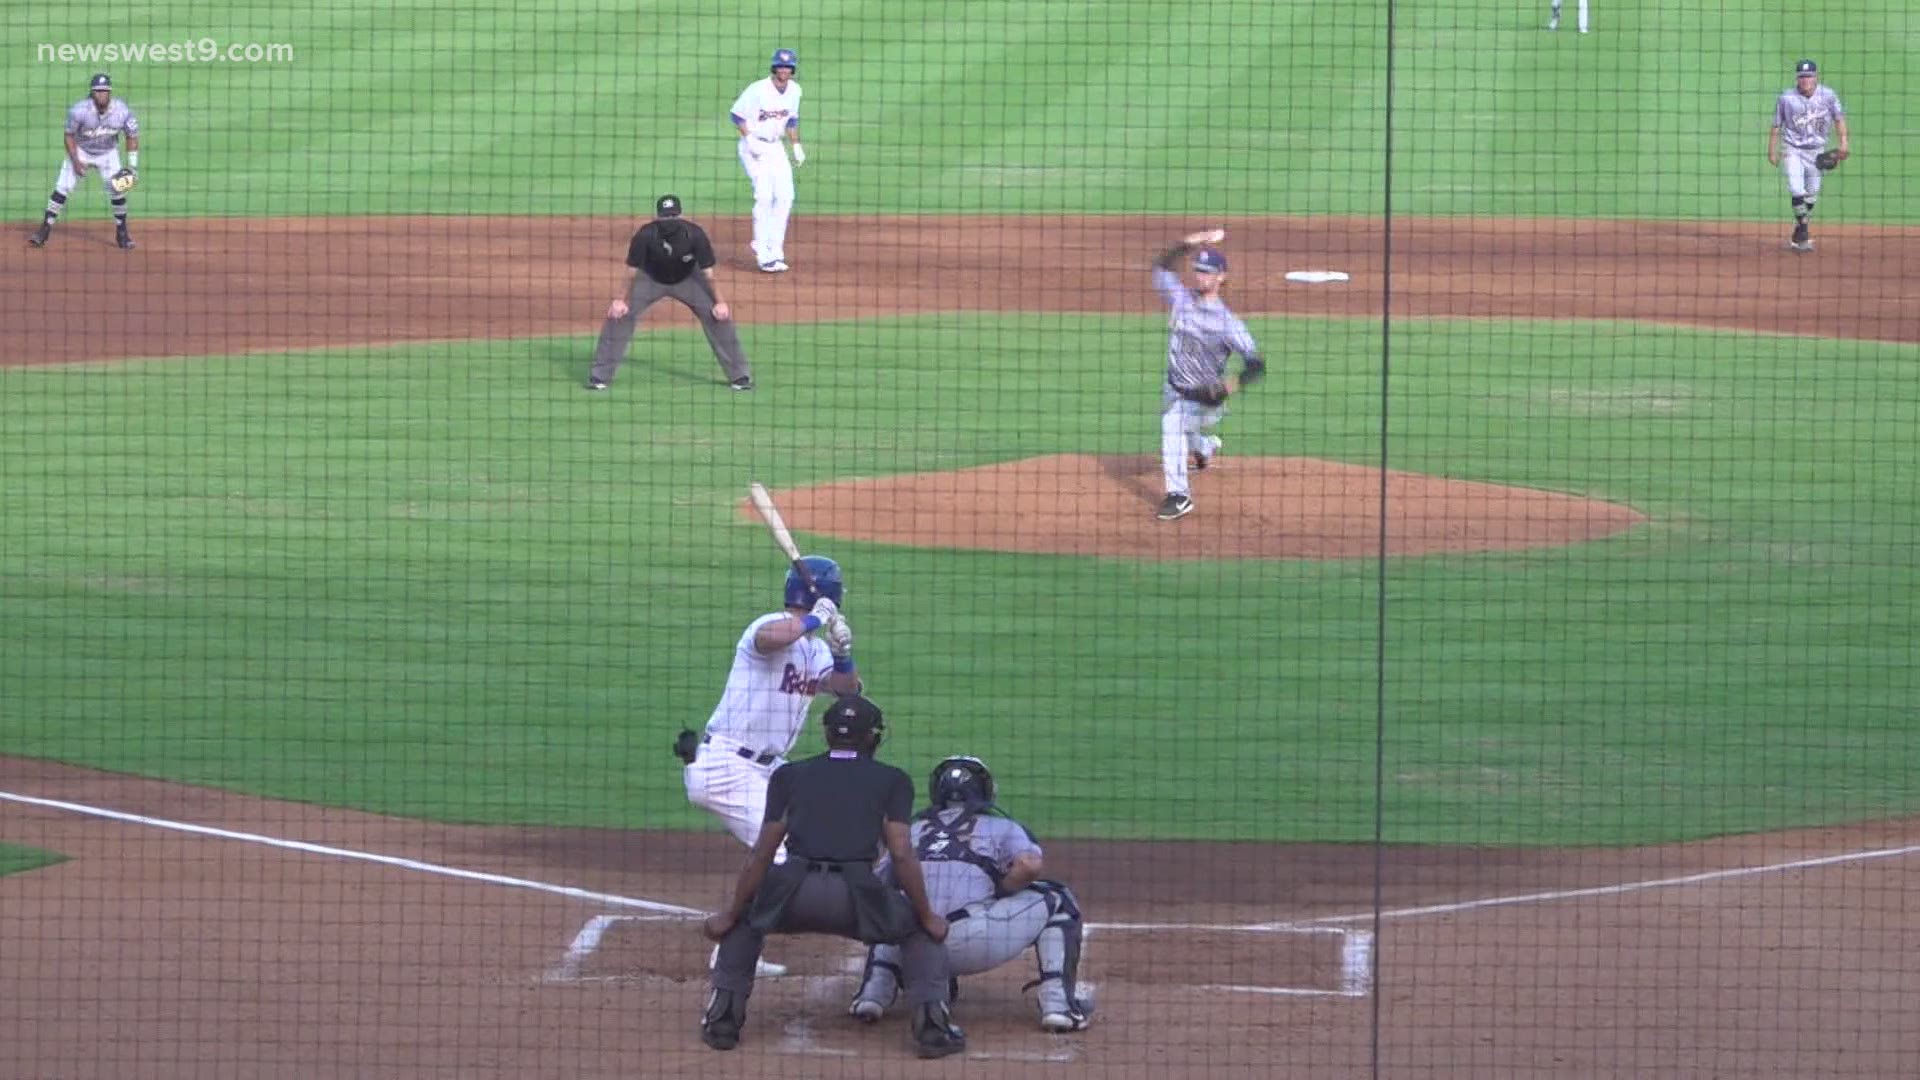 Midland looked to win back to back games against the San Antonio Missions.